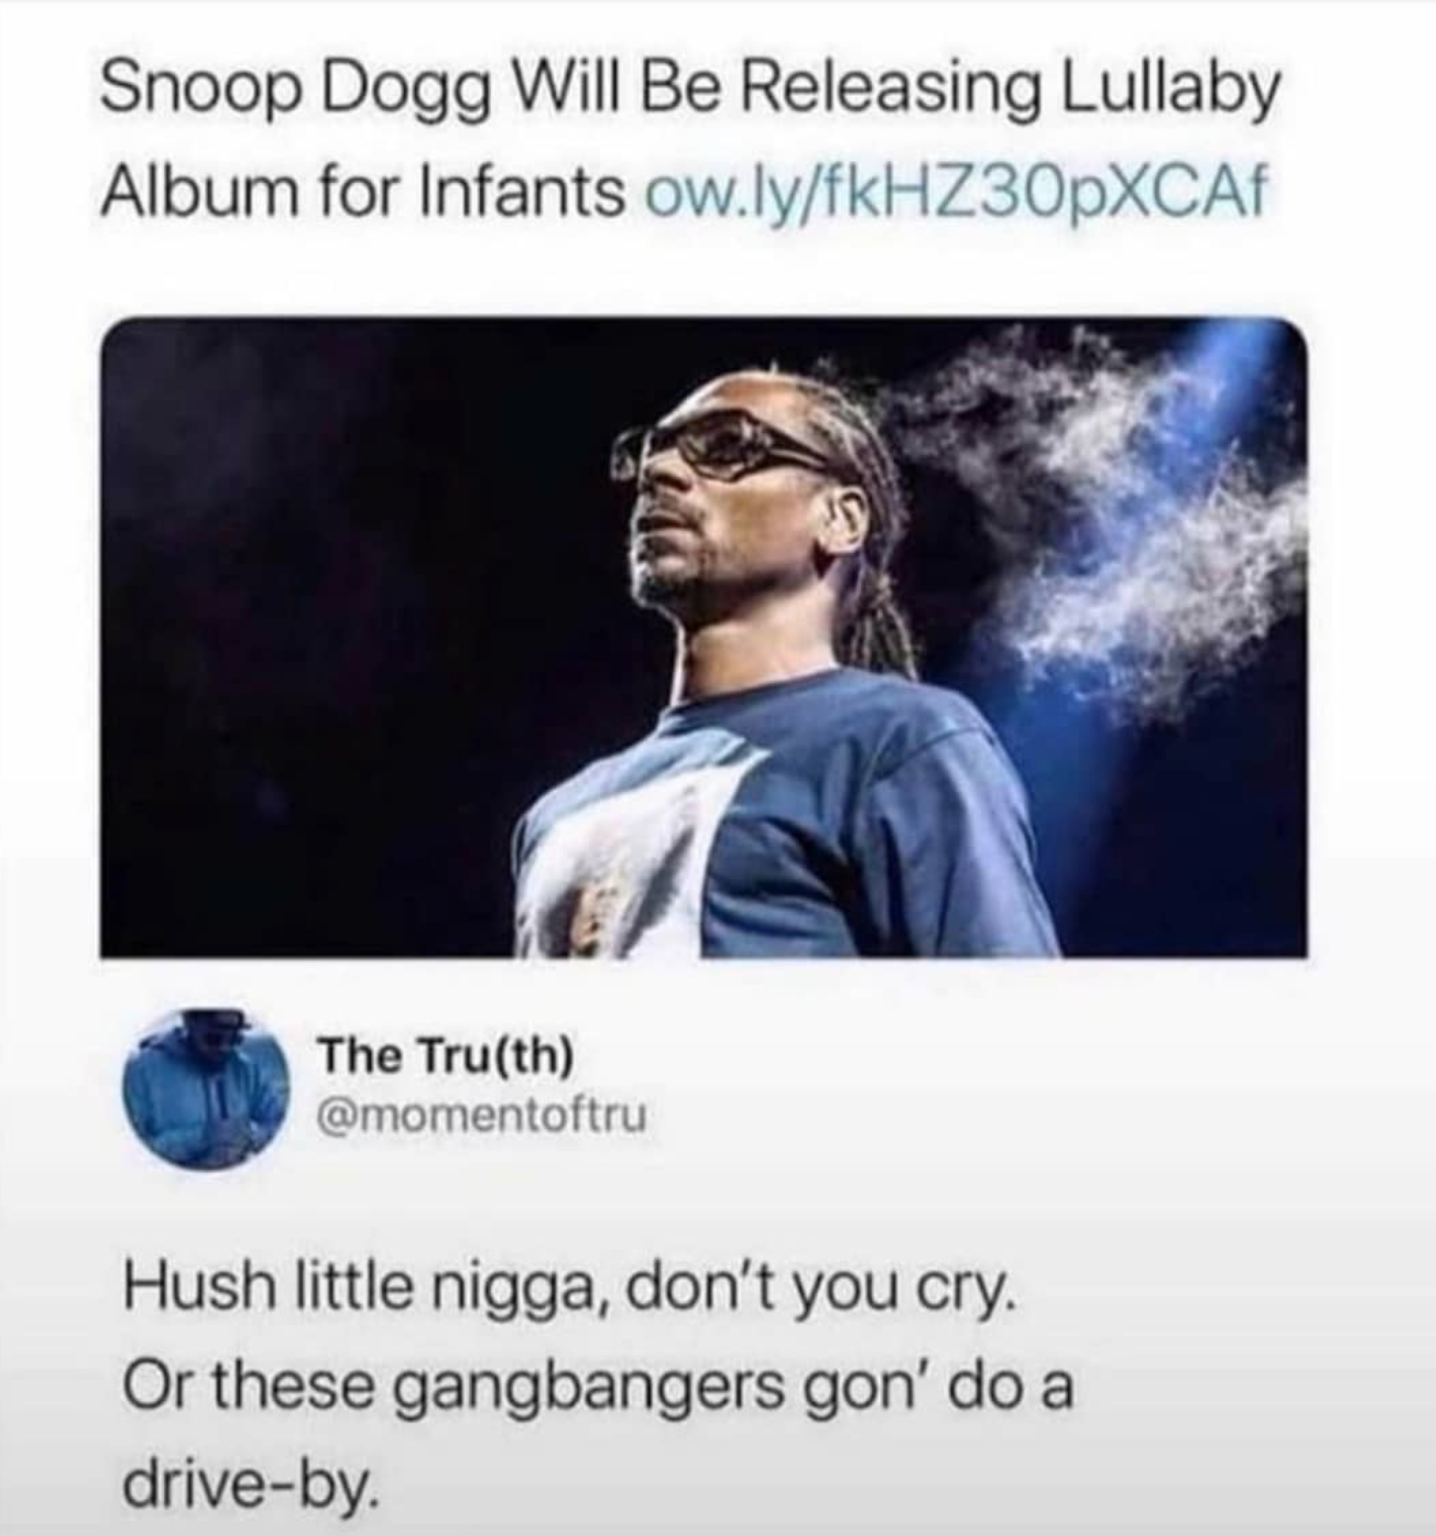 snoop dogg lullaby - Snoop Dogg Will Be Releasing Lullaby Album for Infants ow.lyfkHZ30pXCA The Truth Hush little nigga, don't you cry. Or these gangbangers gon' do a driveby.